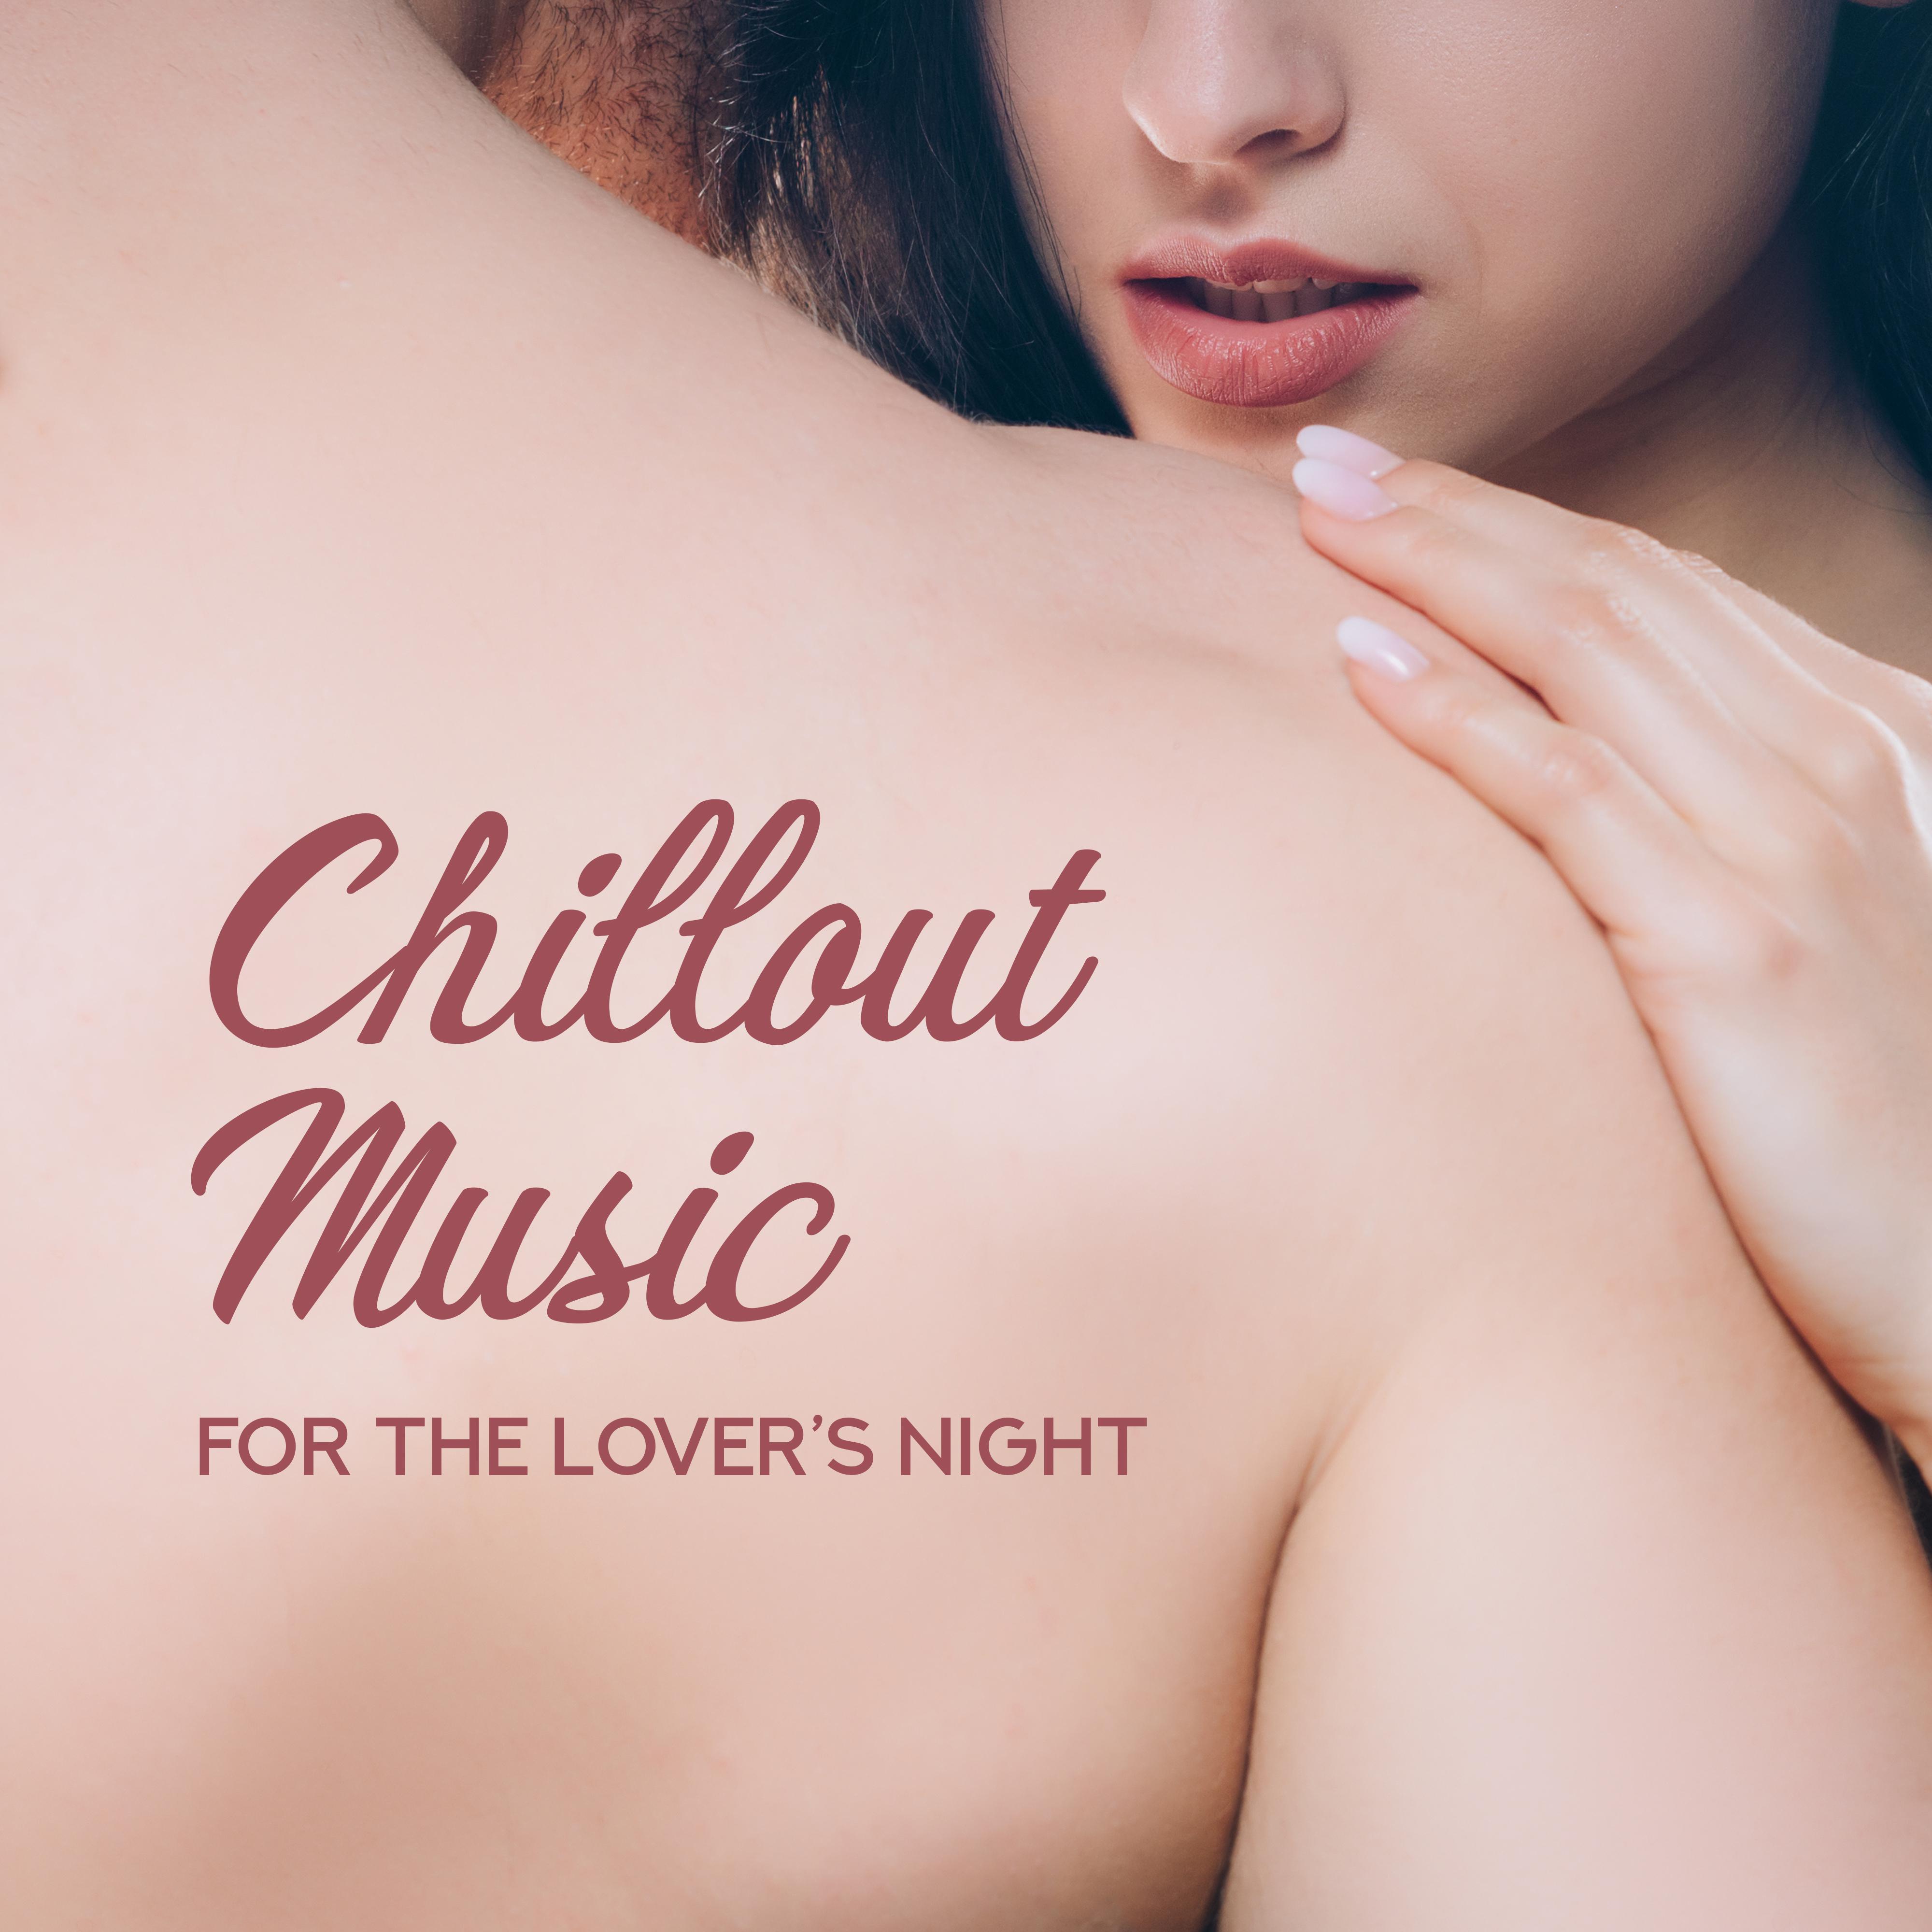 Chillout Music for the Lover’s Night: Sensual 2019 Chill Out Music for Couples, Electronic Beats Created for Most Intimate Moments Full of Passion, Lust & ***